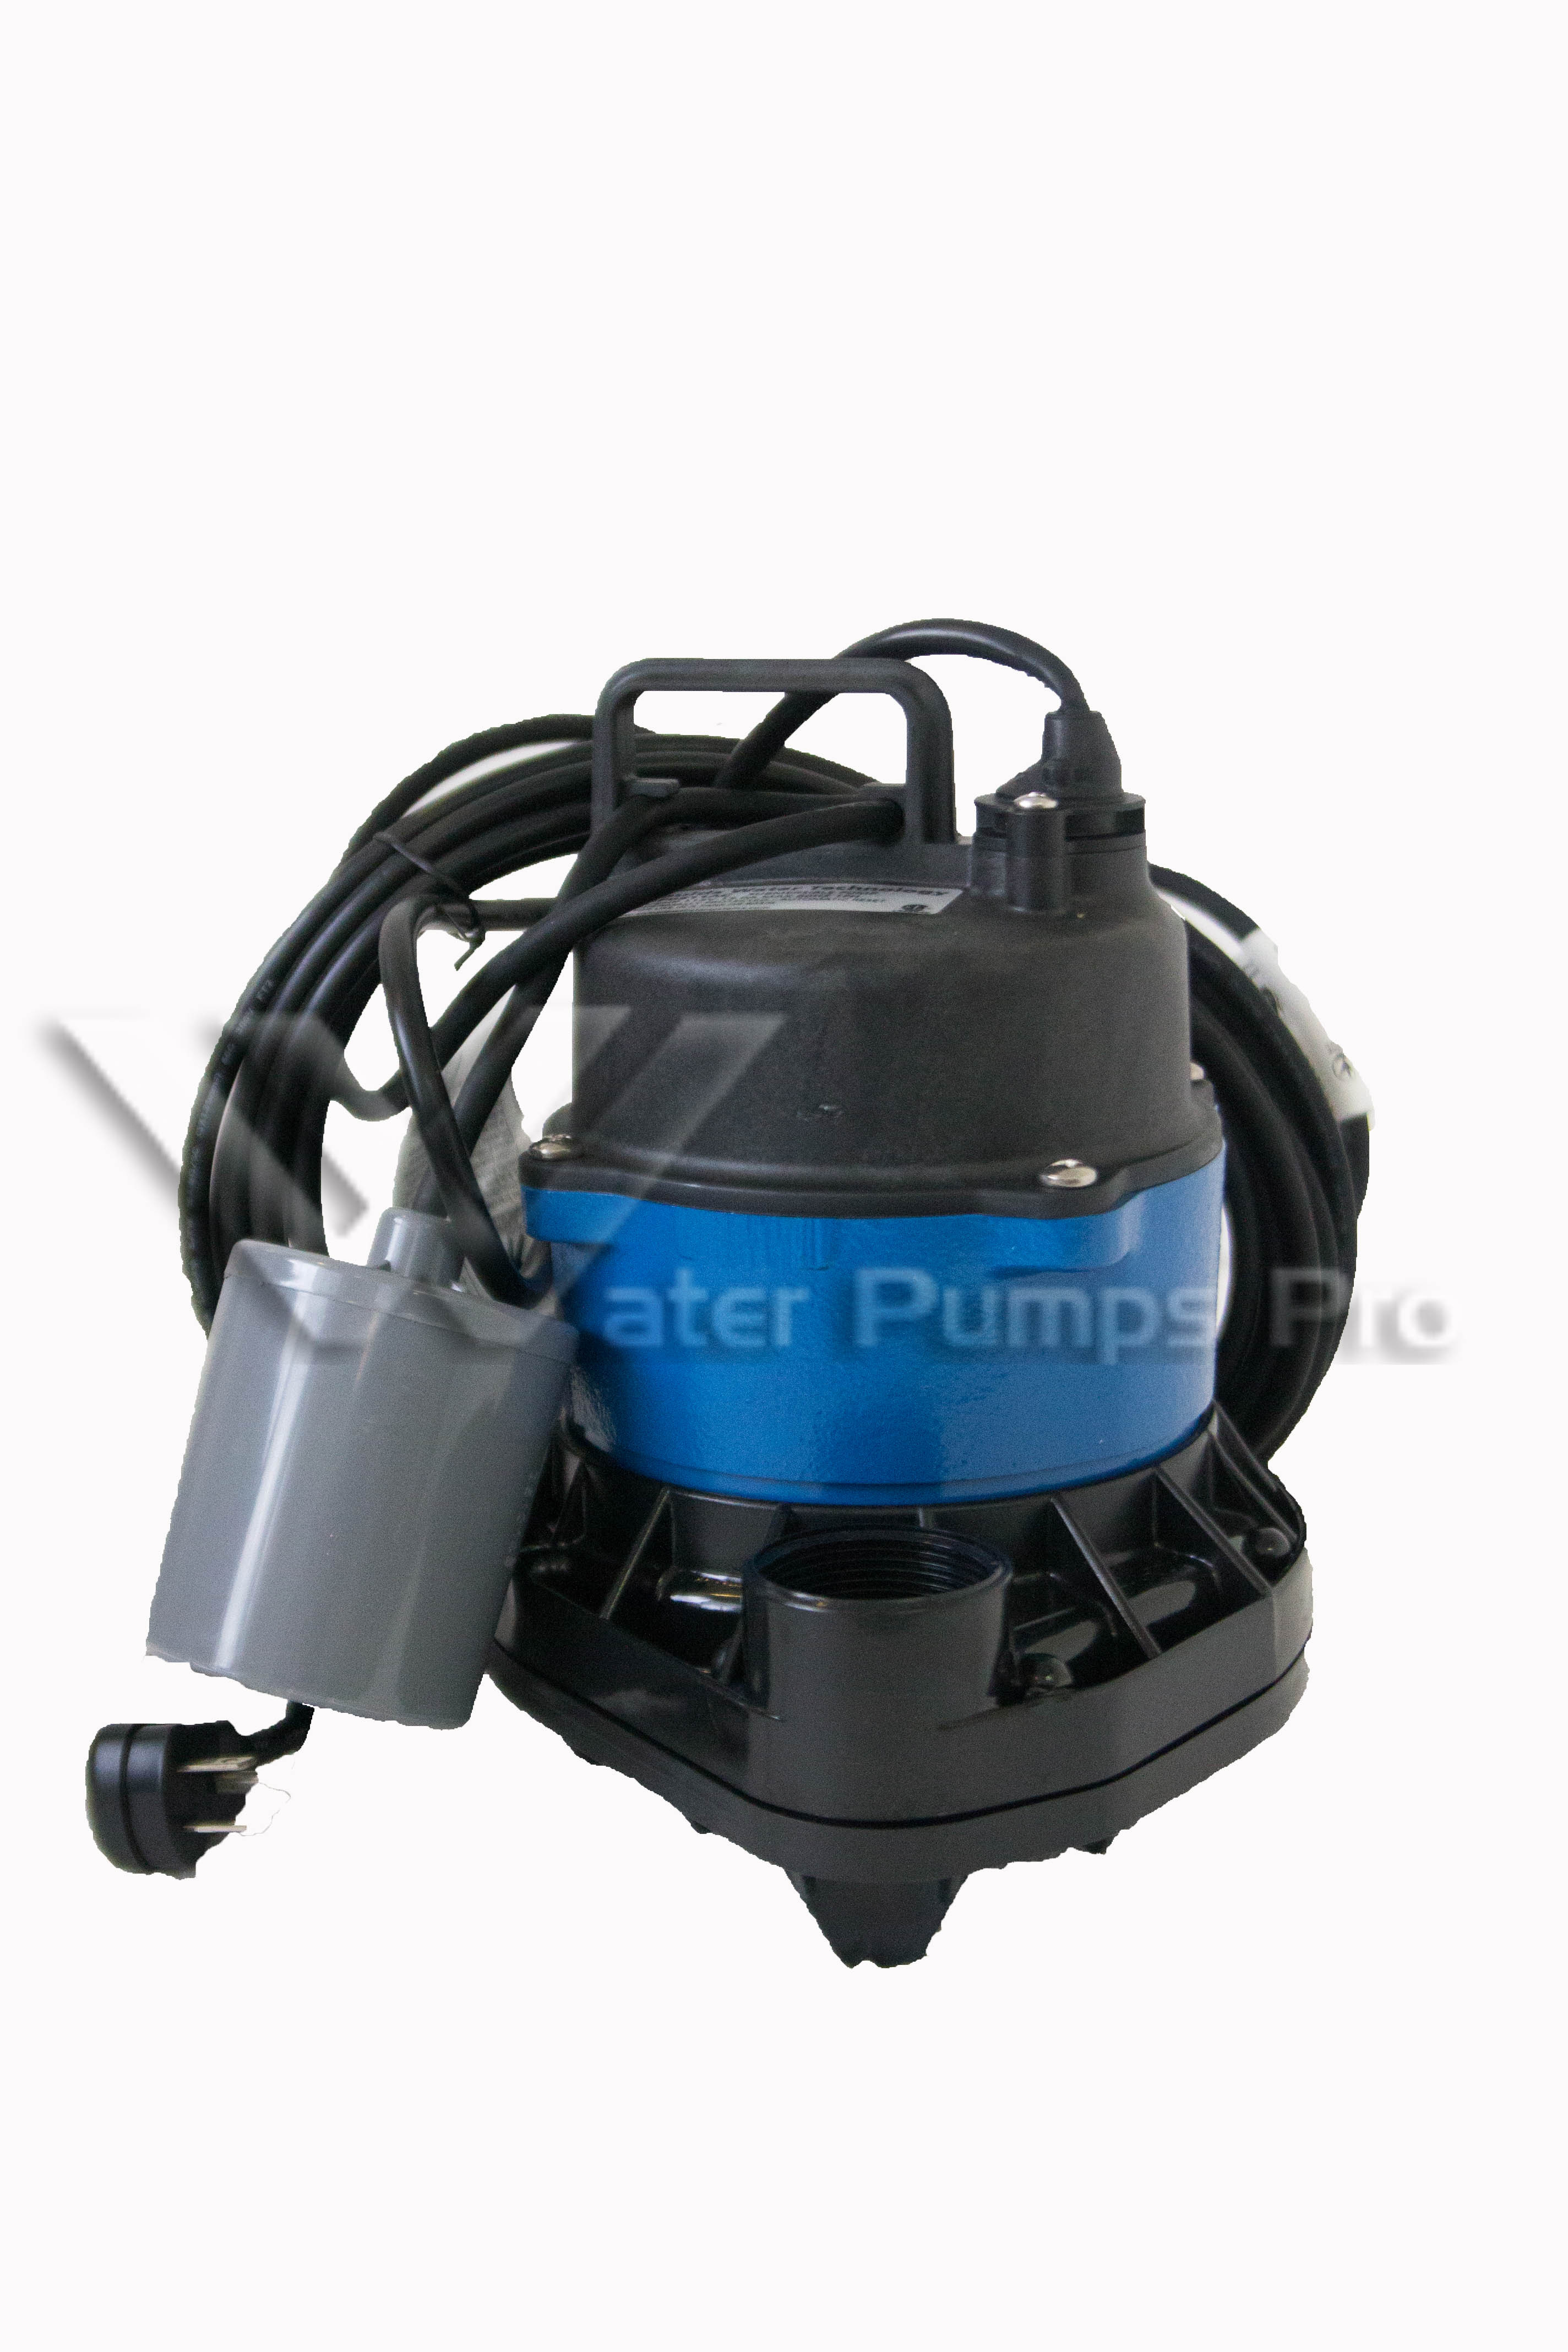 Goulds EP0511AC 1/2 HP 115V Submersible Effluent Pump